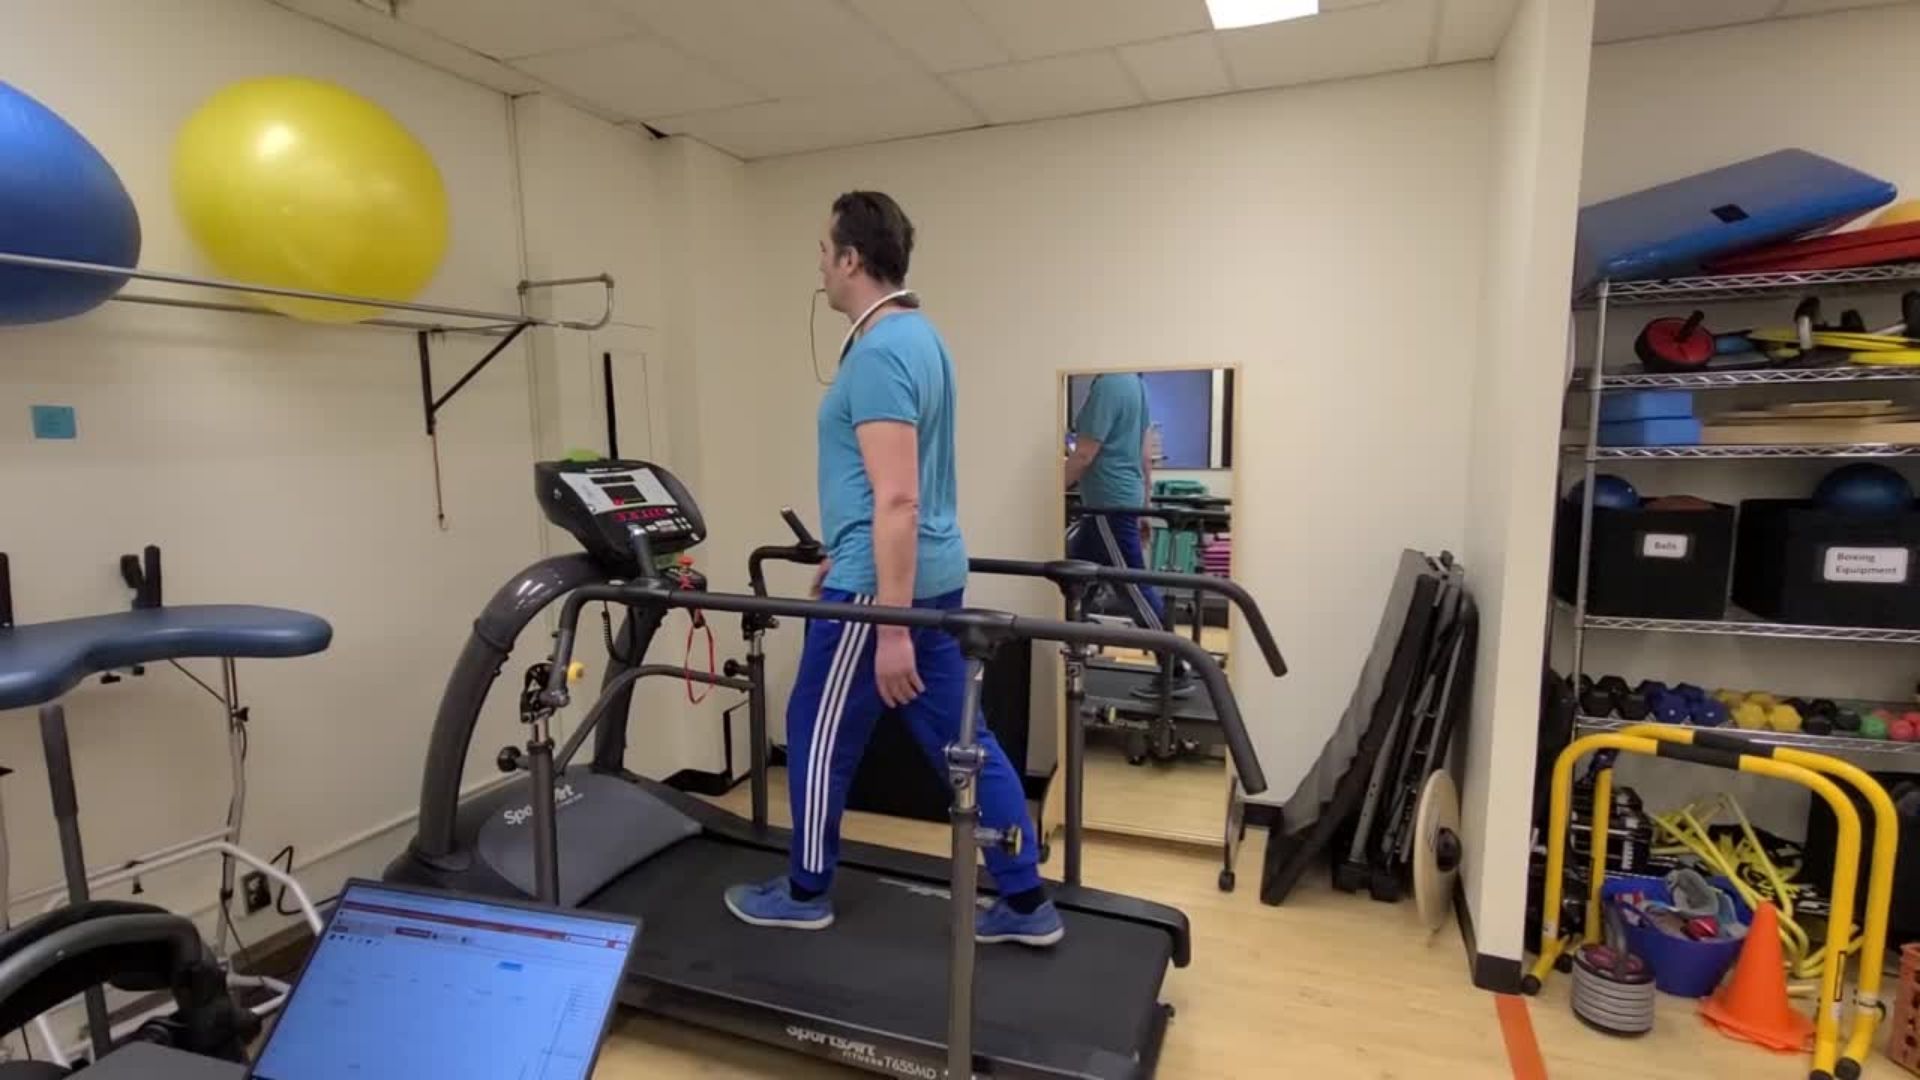 PoNS Treatment case study improving walking and balance ability in people with MS